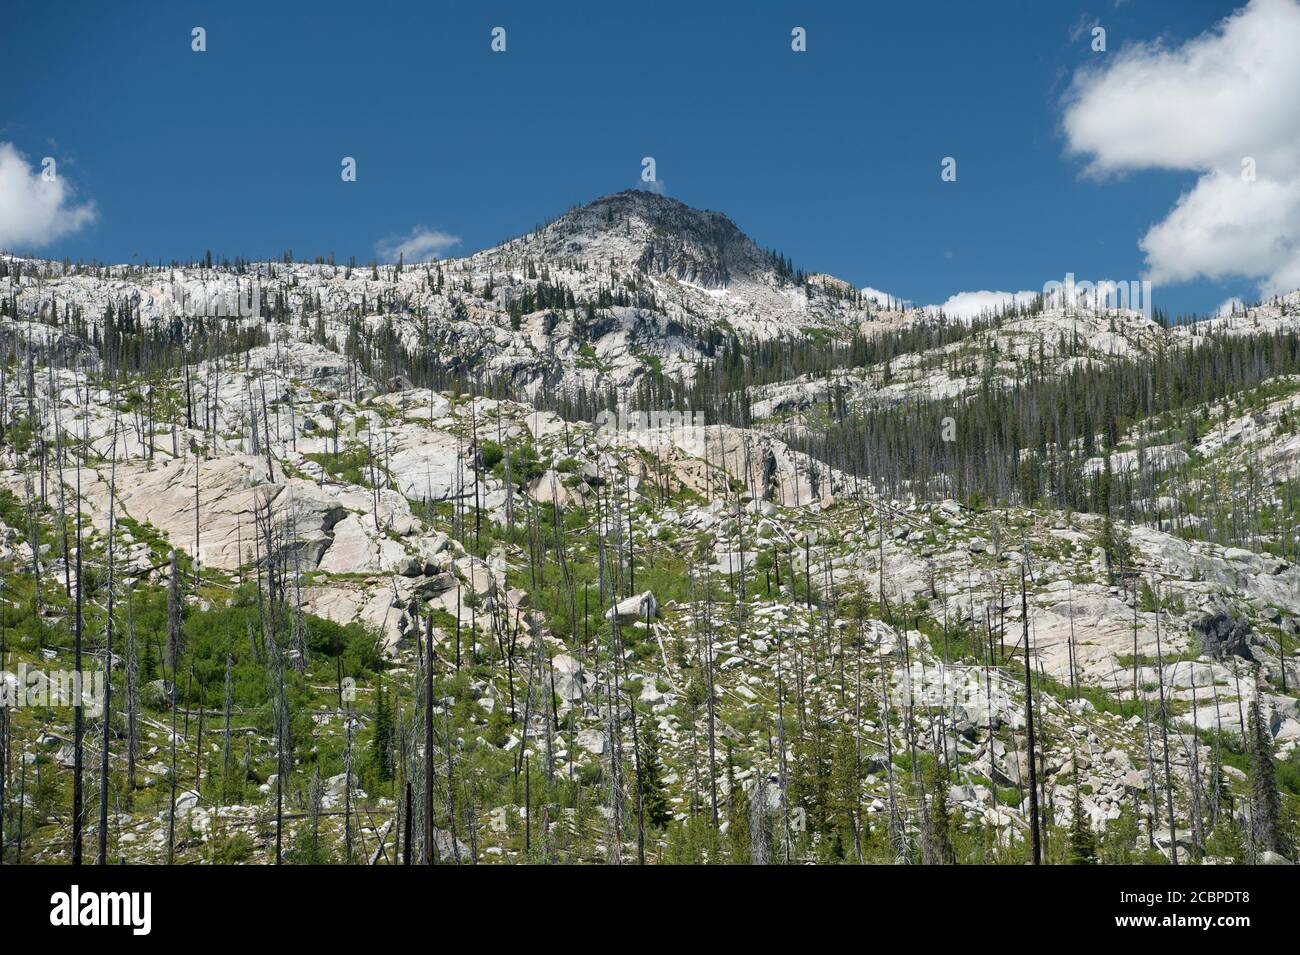 Idaho (Atlanta) Batholith from Lick Creek summit in the Payette National Forest in west-central Idaho Stock Photo